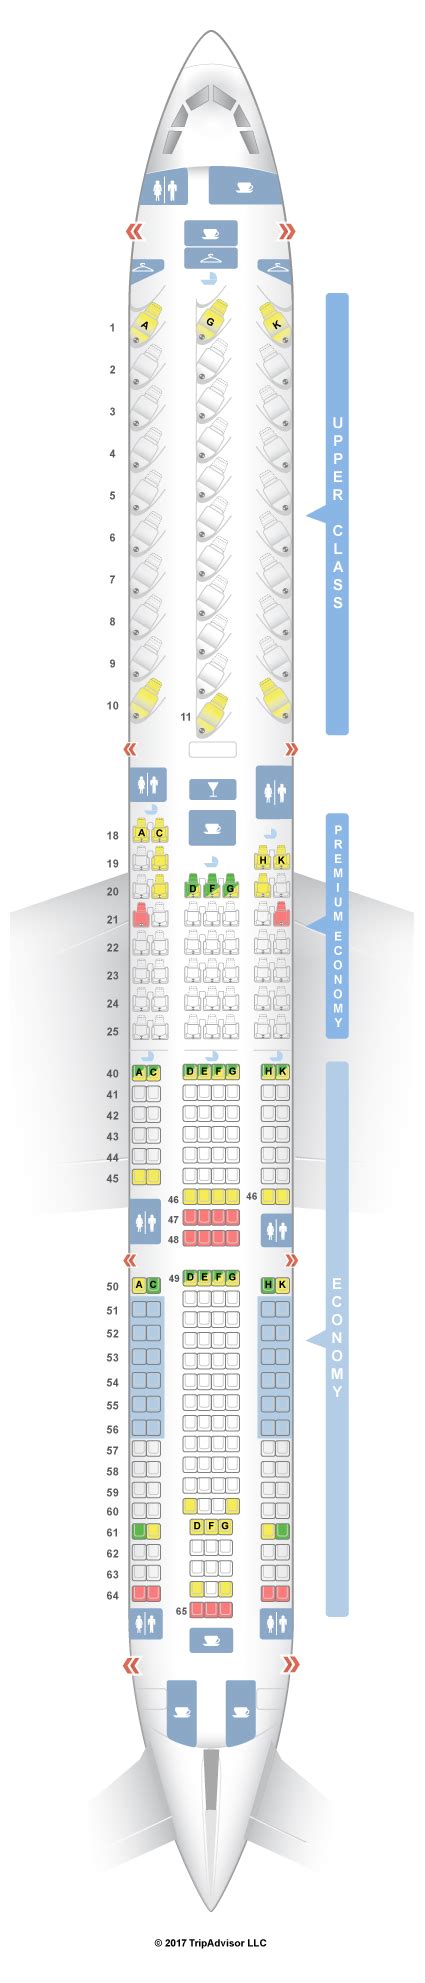 A330 Seat Map Aer Lingus